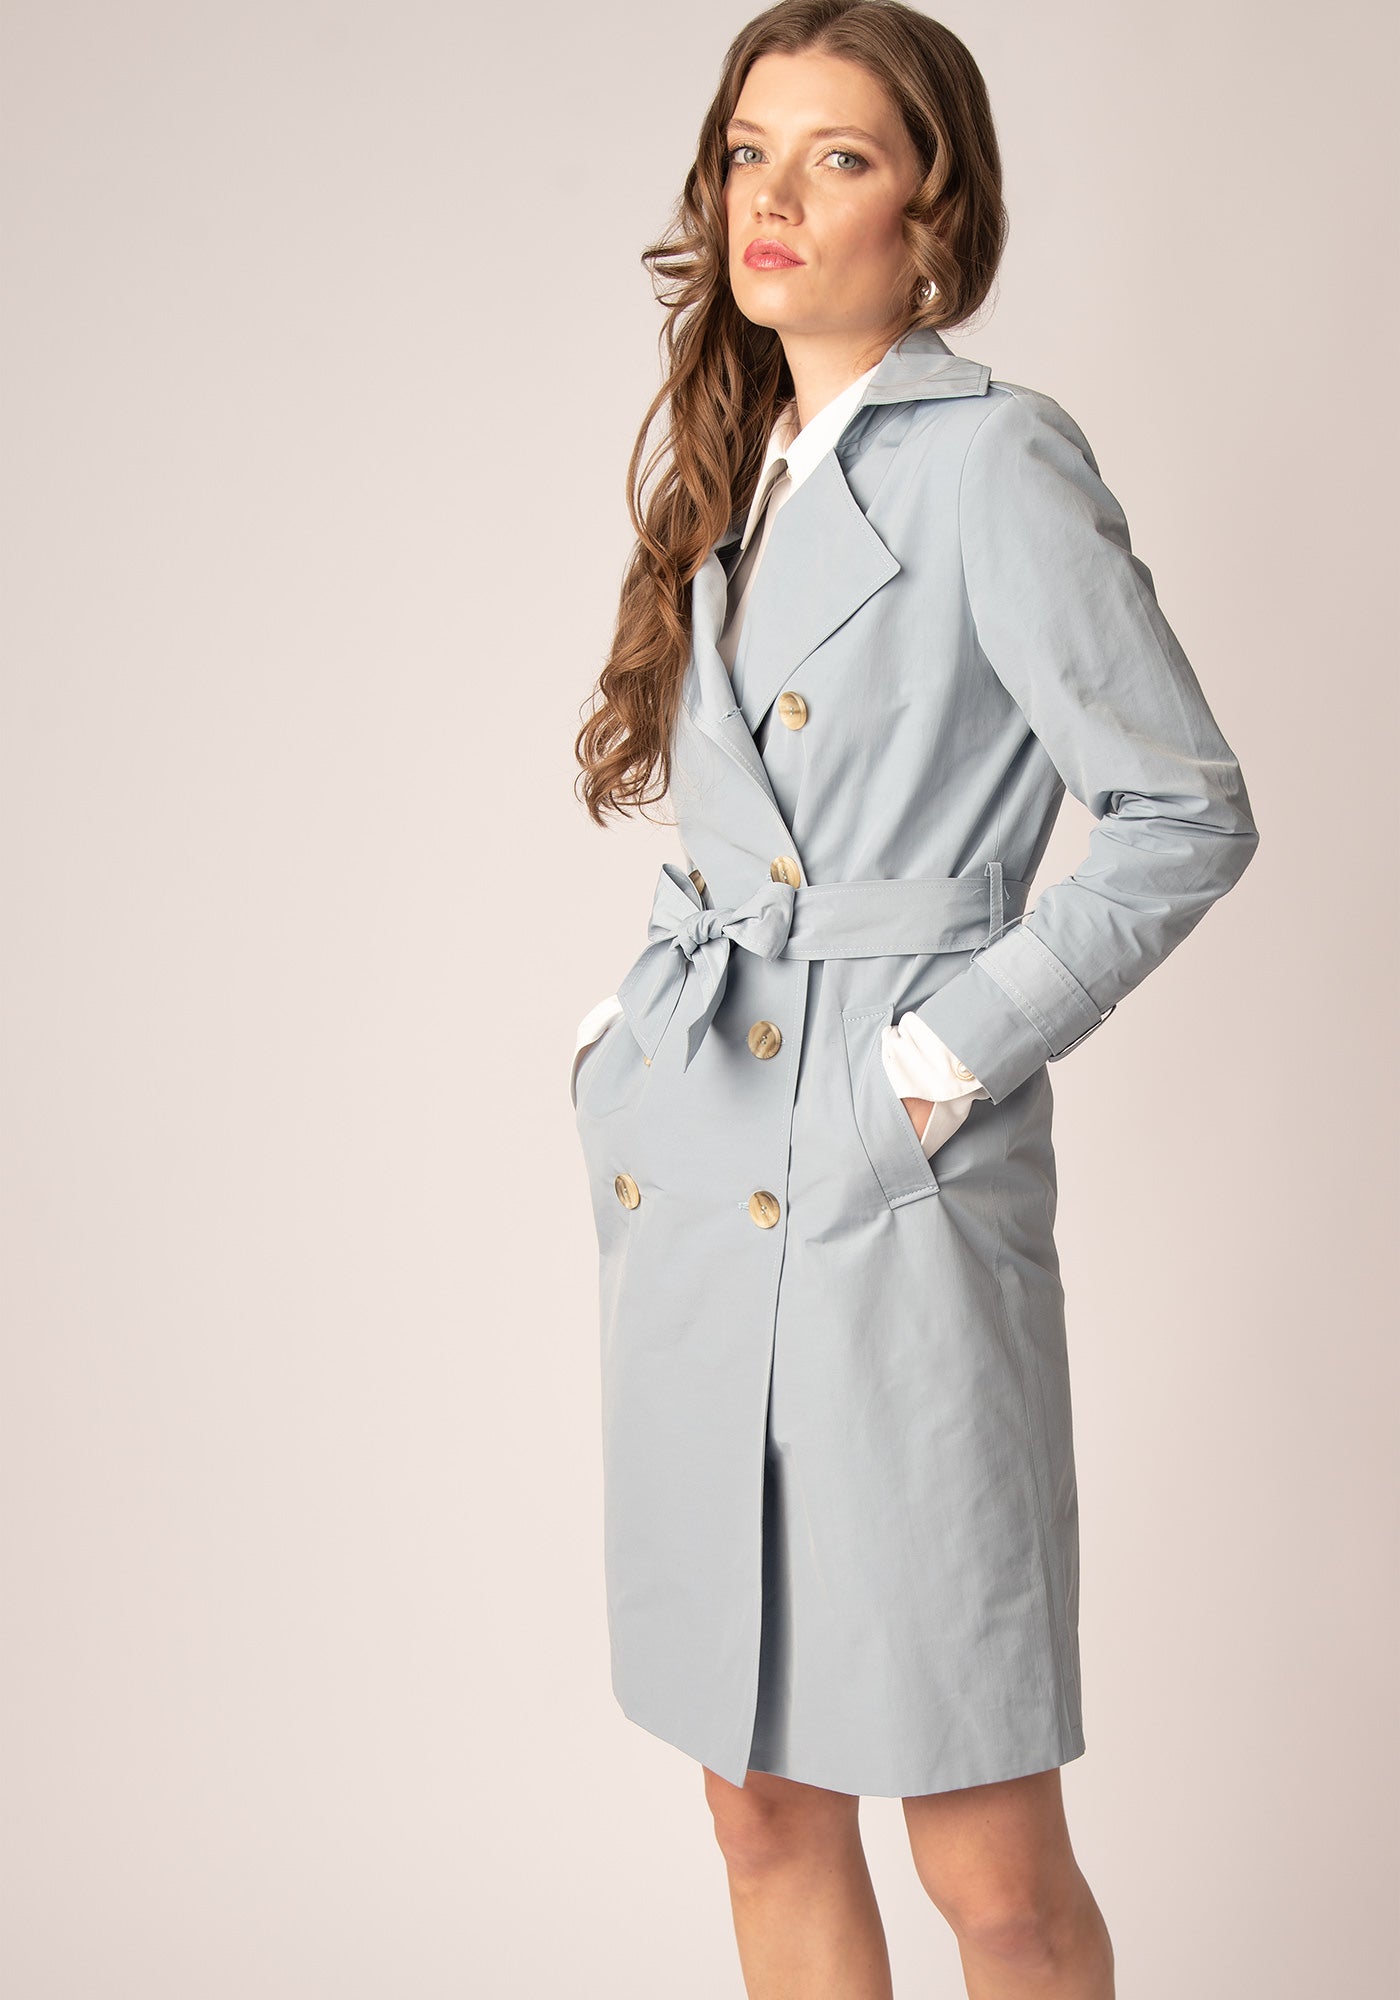 Women's Tailored Double breasted Trench coat in Serenity